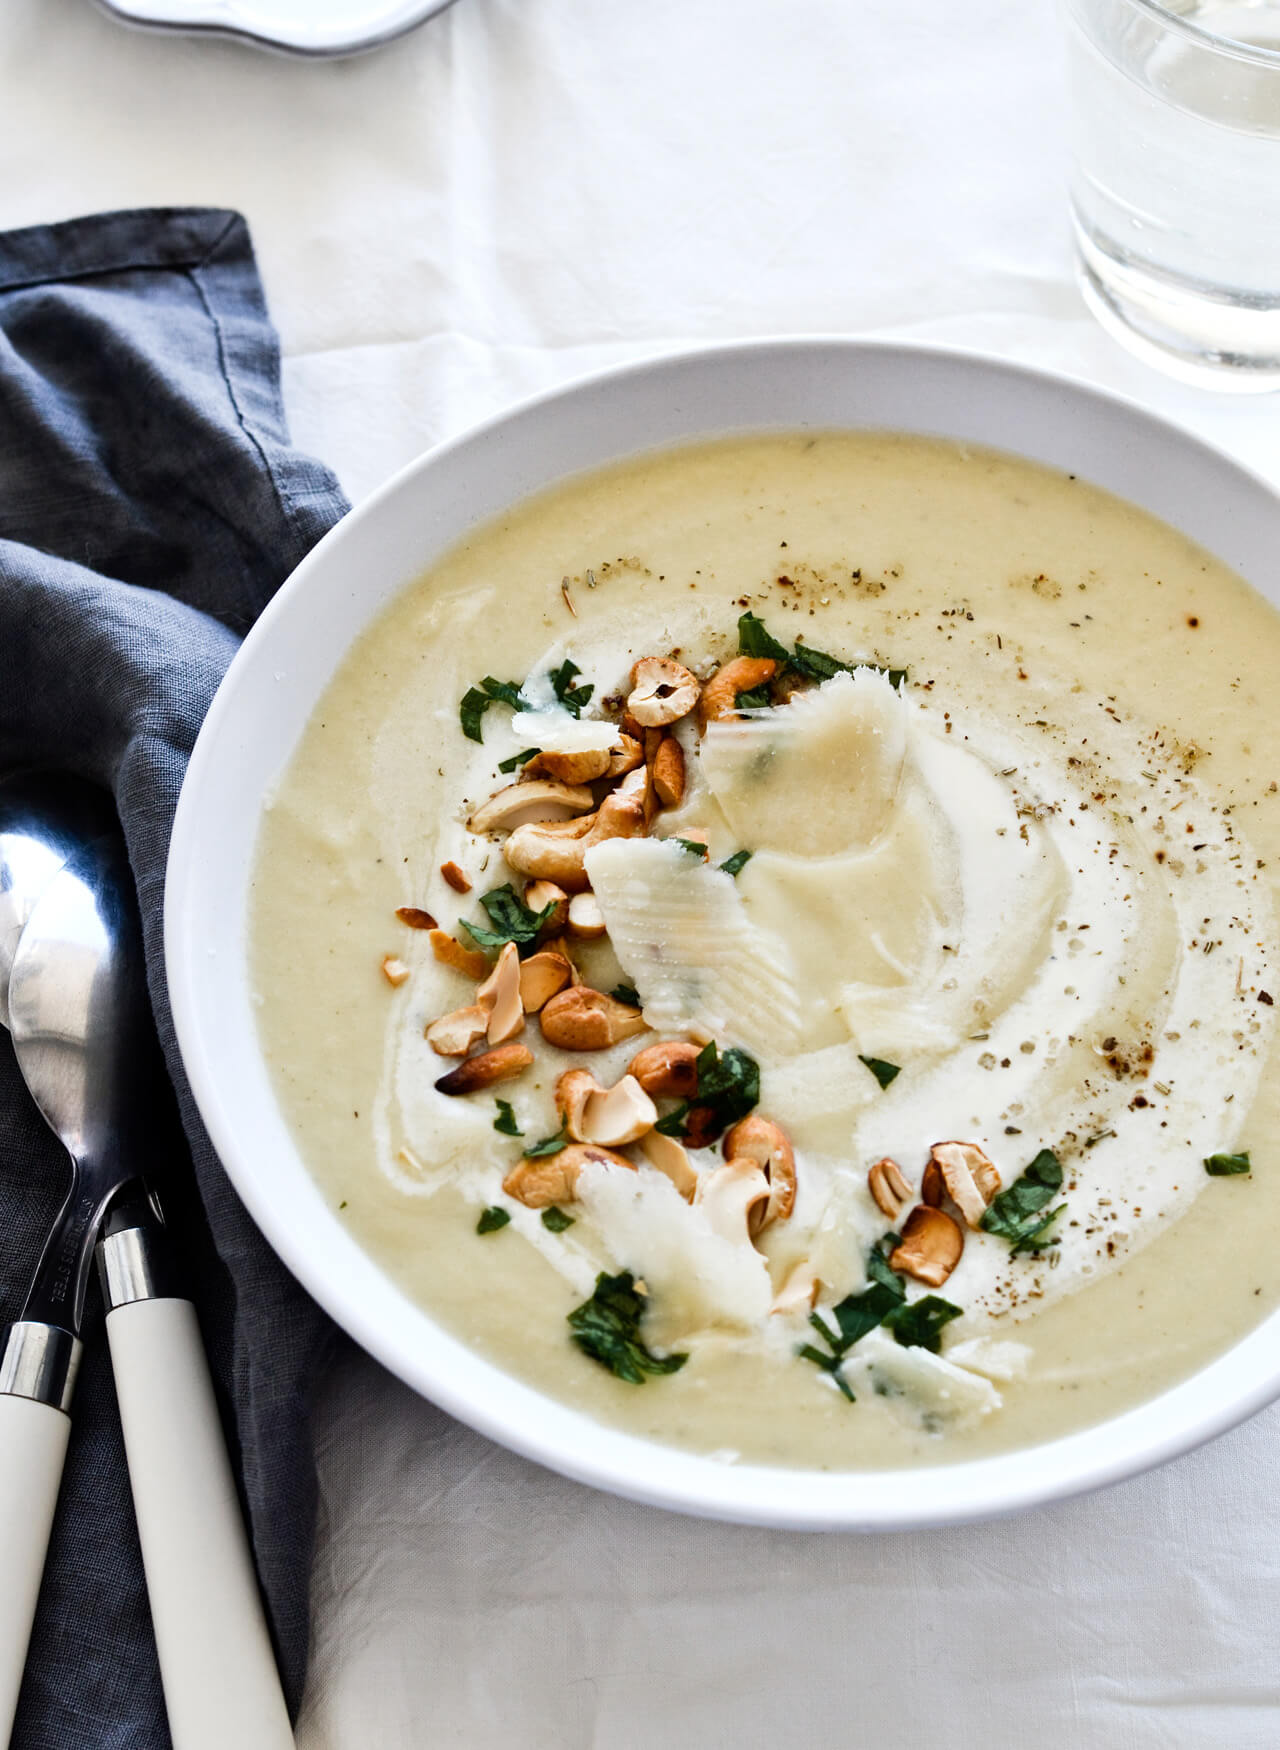 This quick creamy cauliflower soup is made in 30 minutes, using simple and few ingredients. Makes a perfect lunch or dinner.